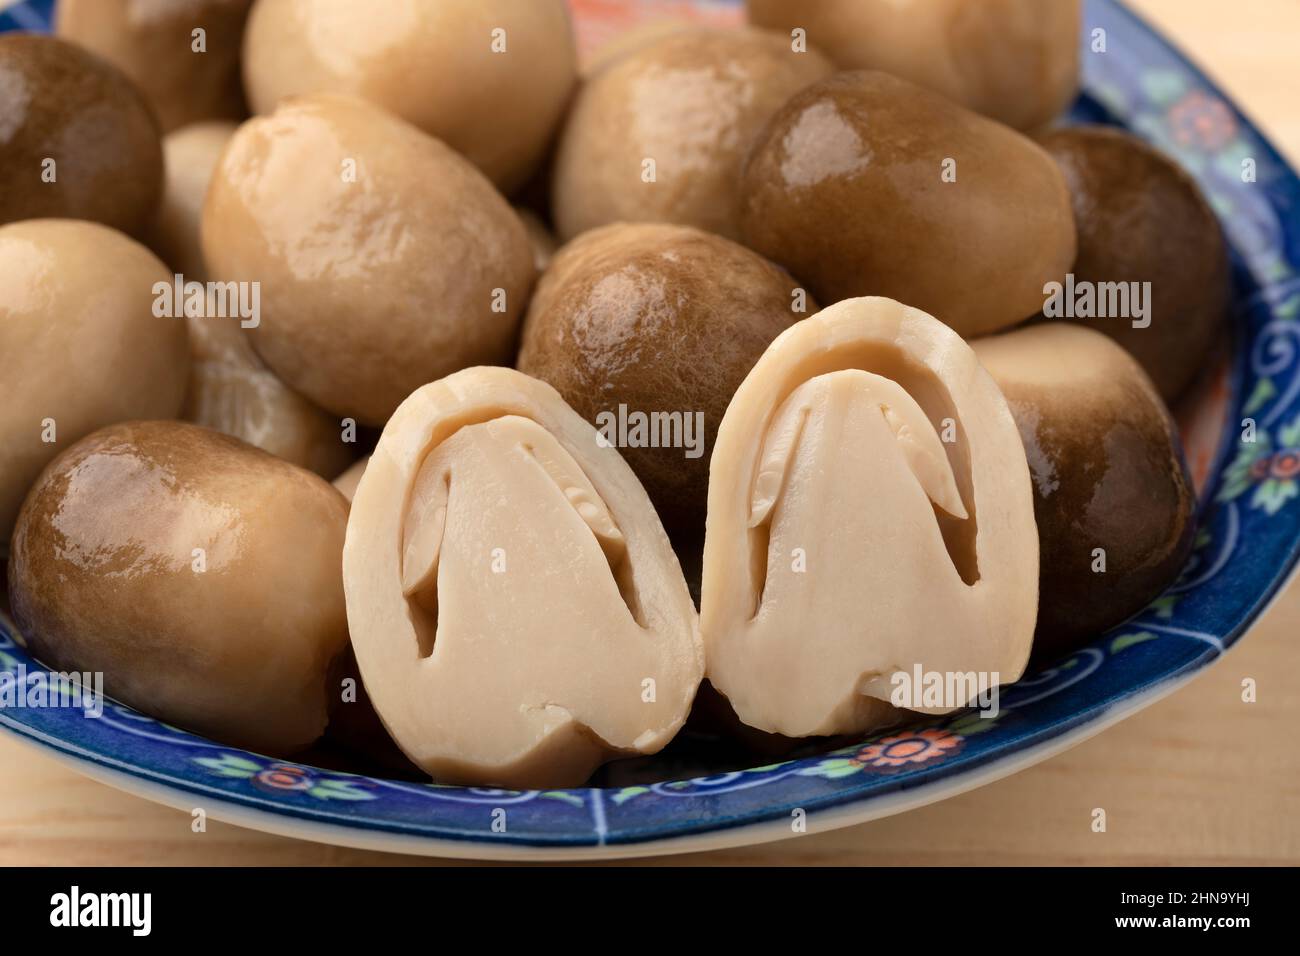 Whole and half canned straw mushroom in a bowl close up Stock Photo